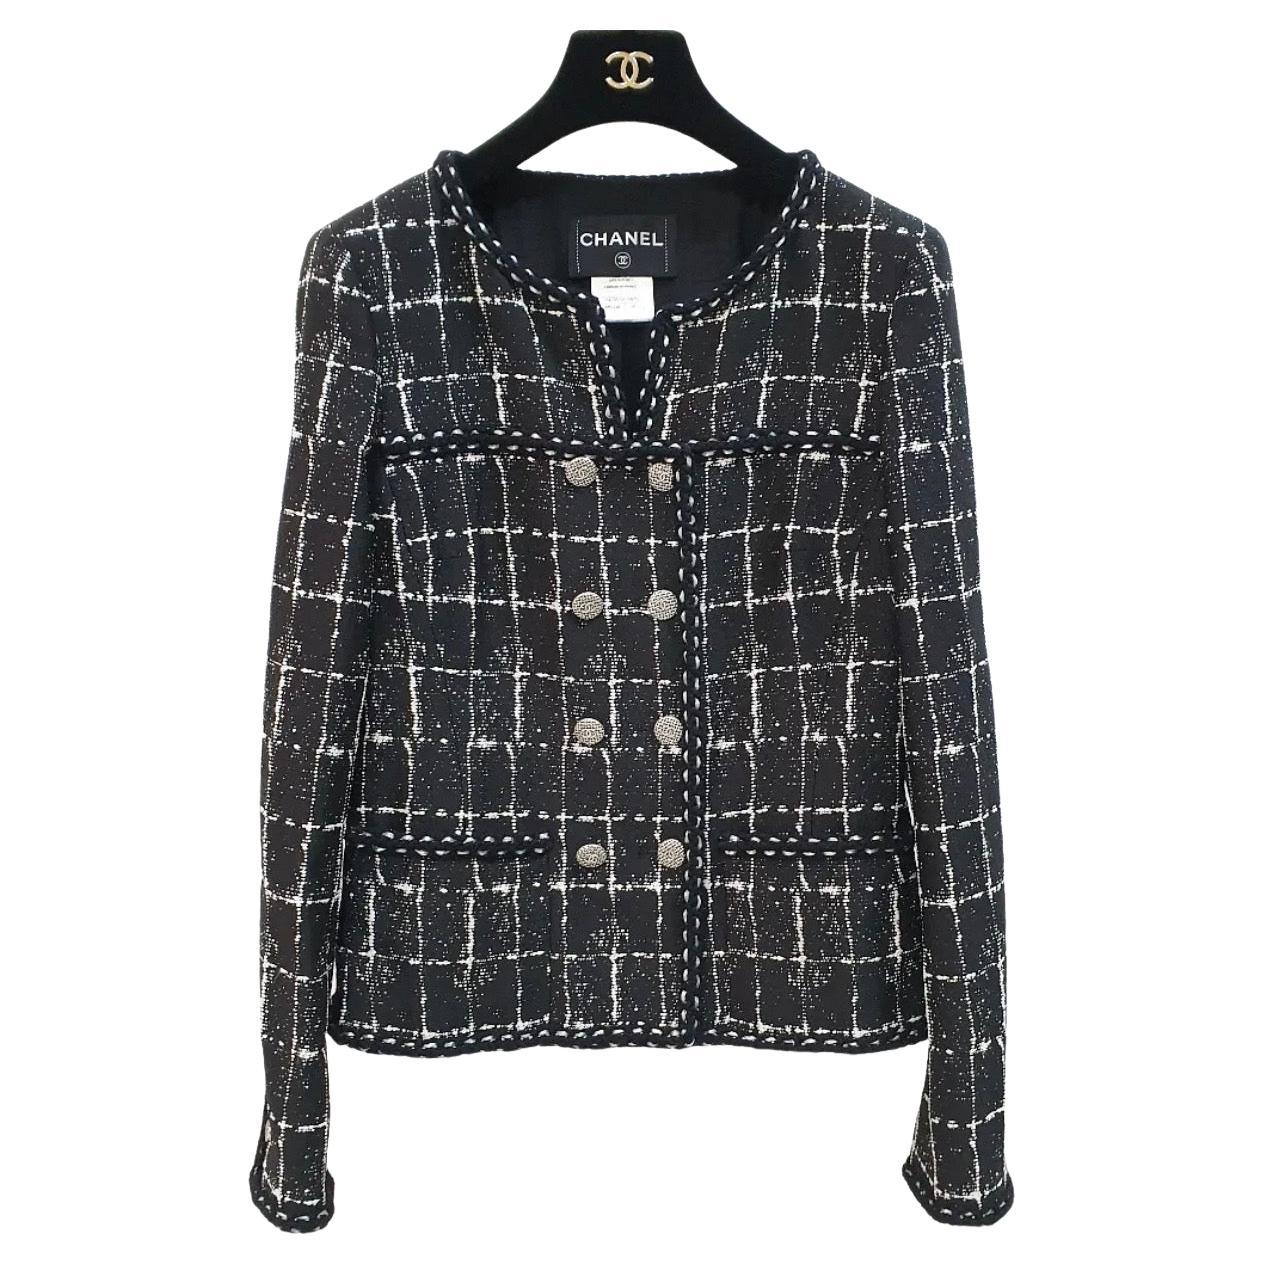 Chanel 2014 Black and White Tweed Jacket